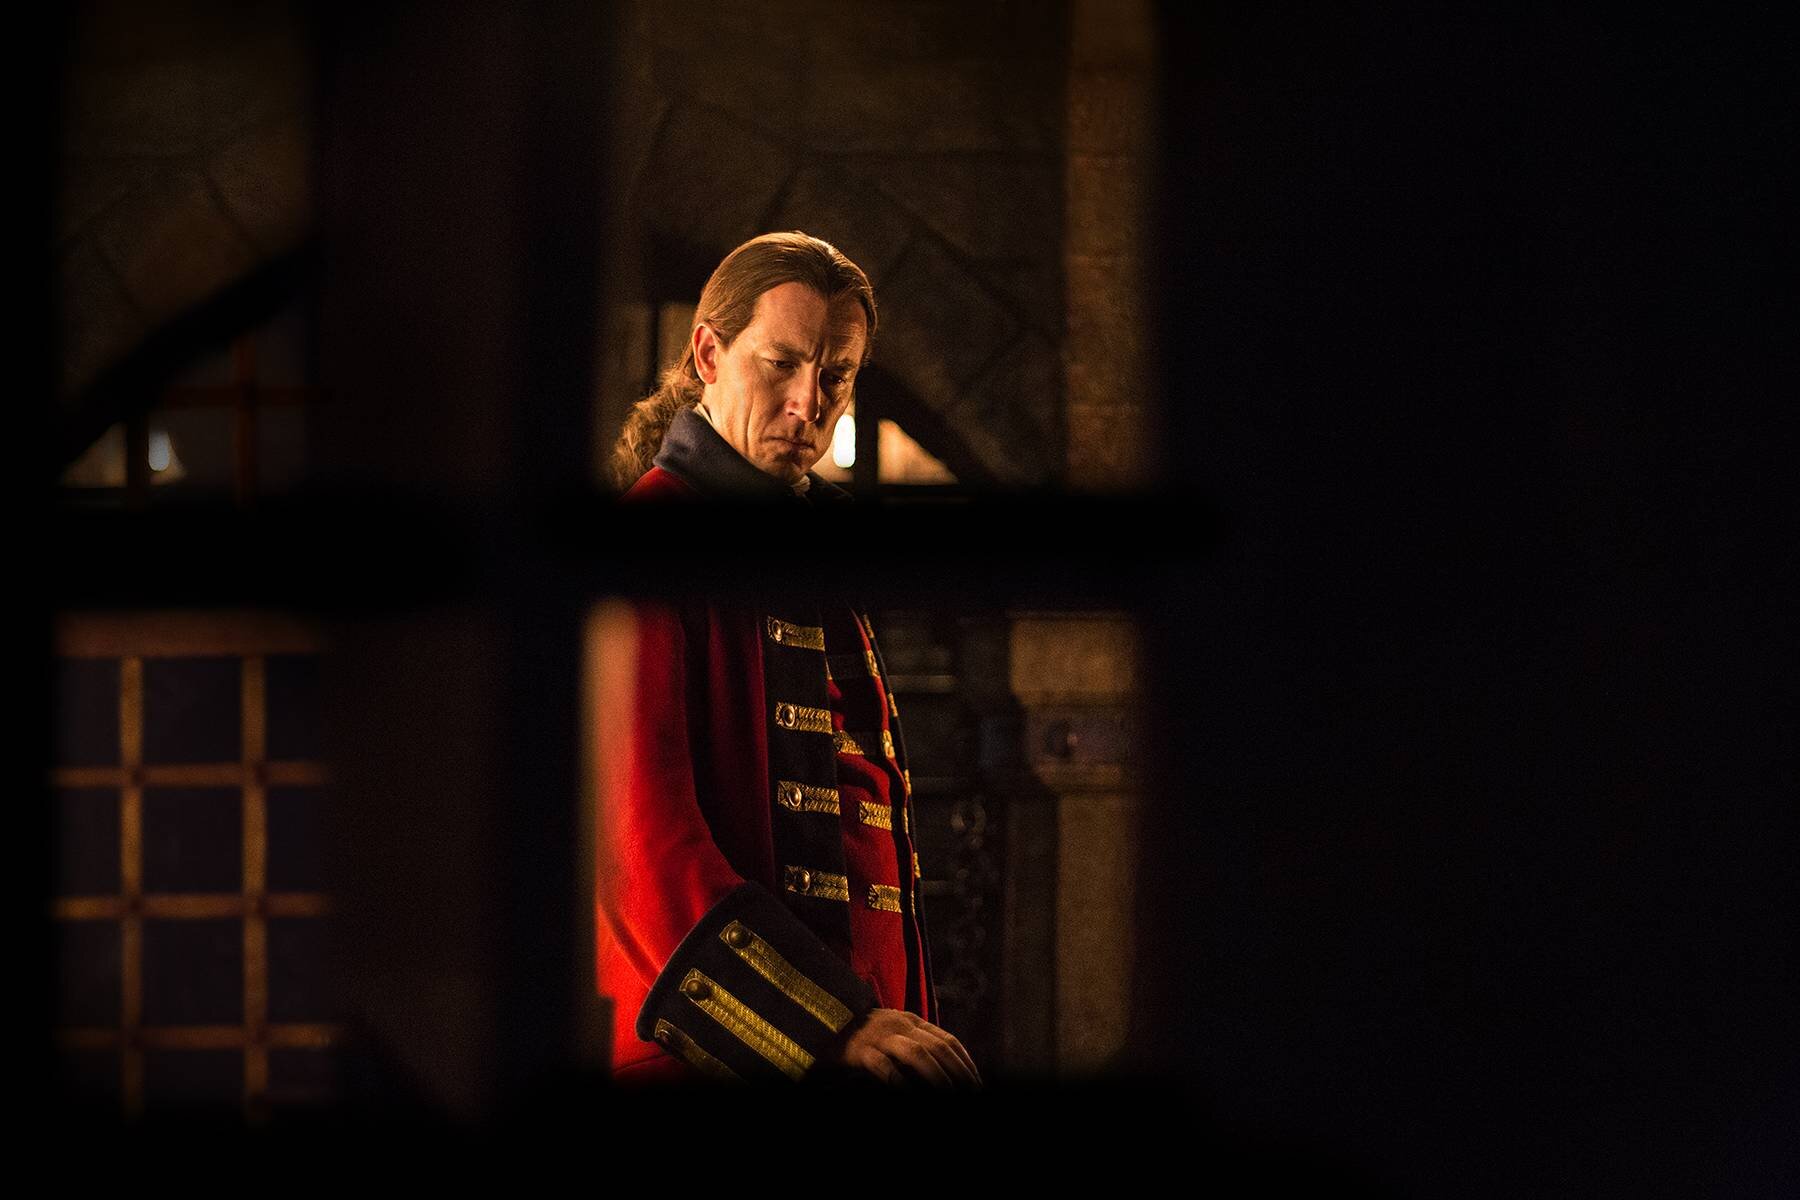 Black Jack who is a real bad guy in Outlander